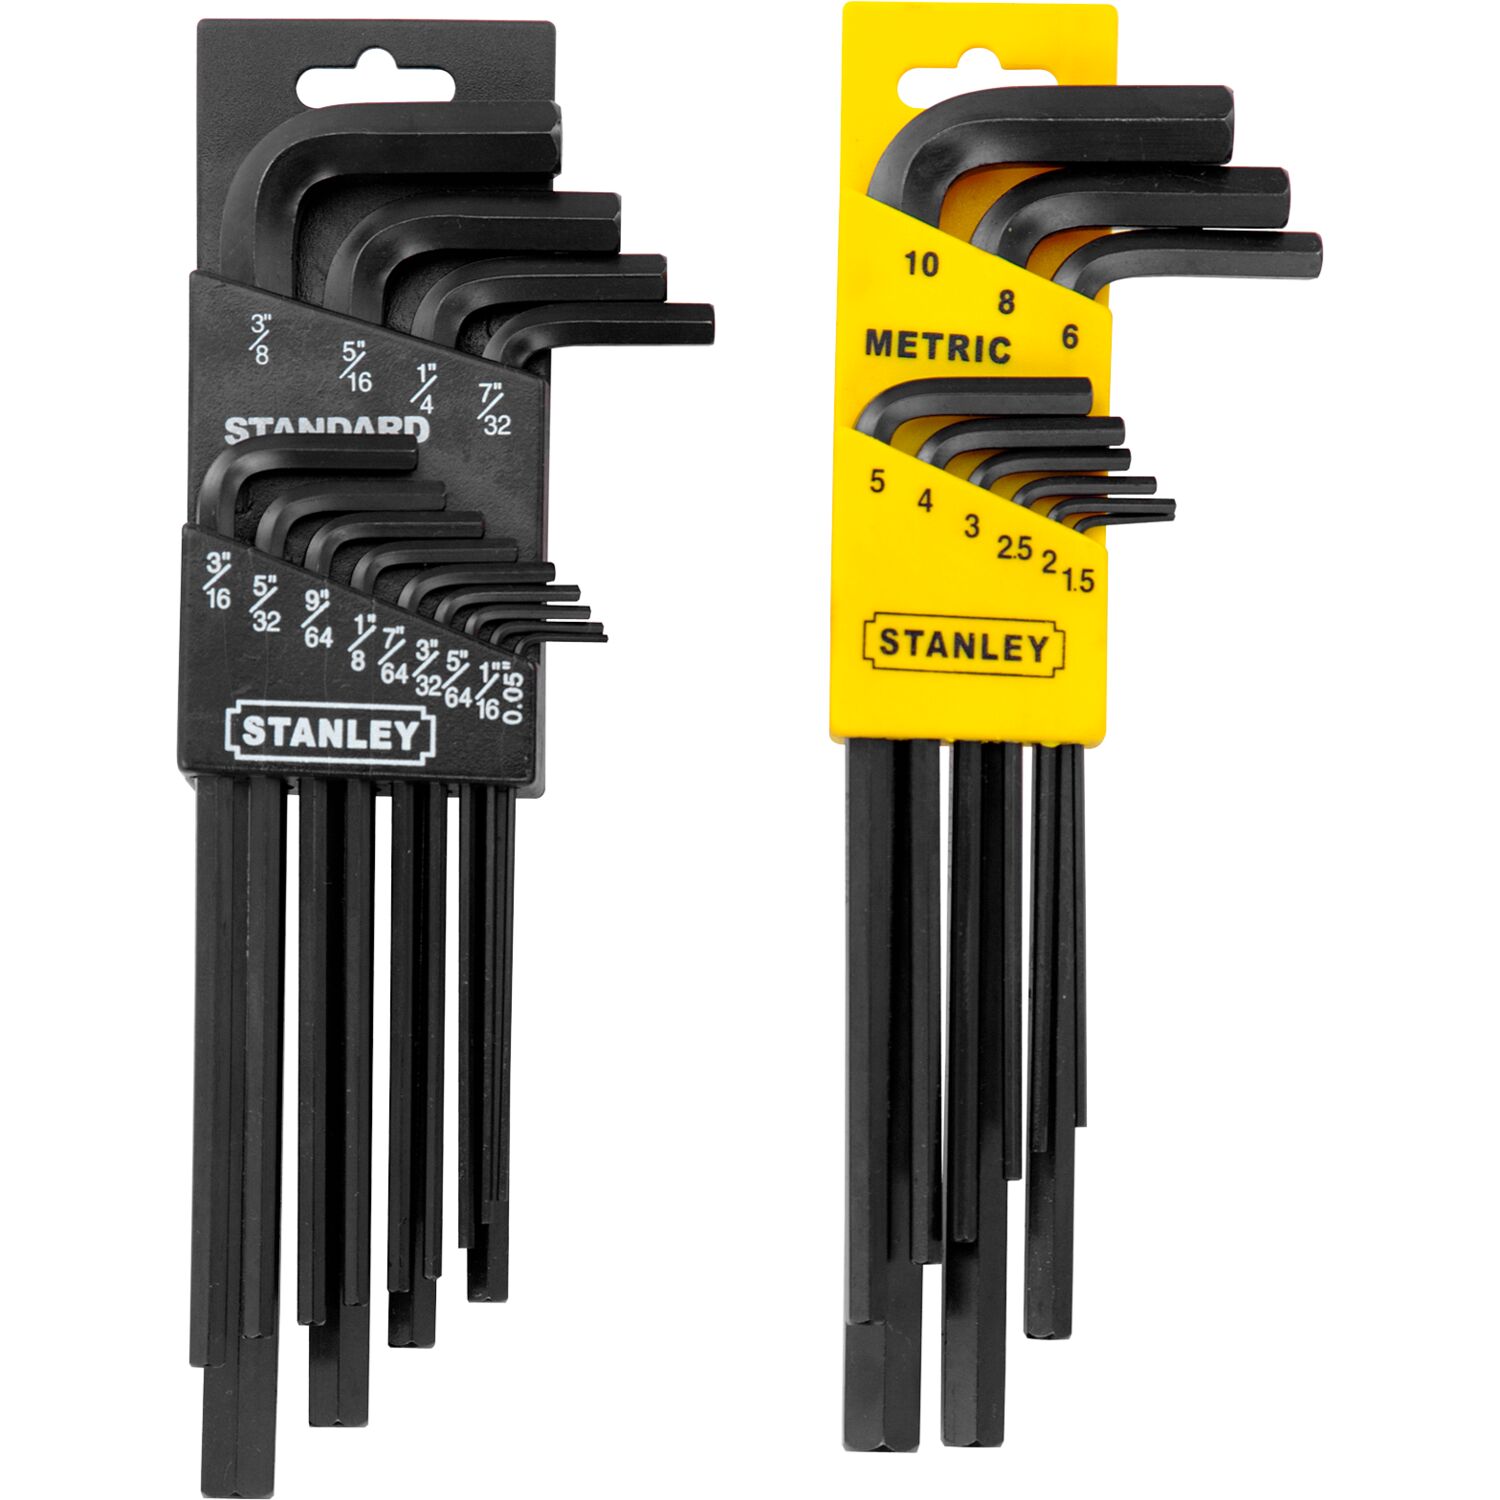 Stanley® Folding Metric and SAE Hex Keys, 2/Pack, Yellow/Black